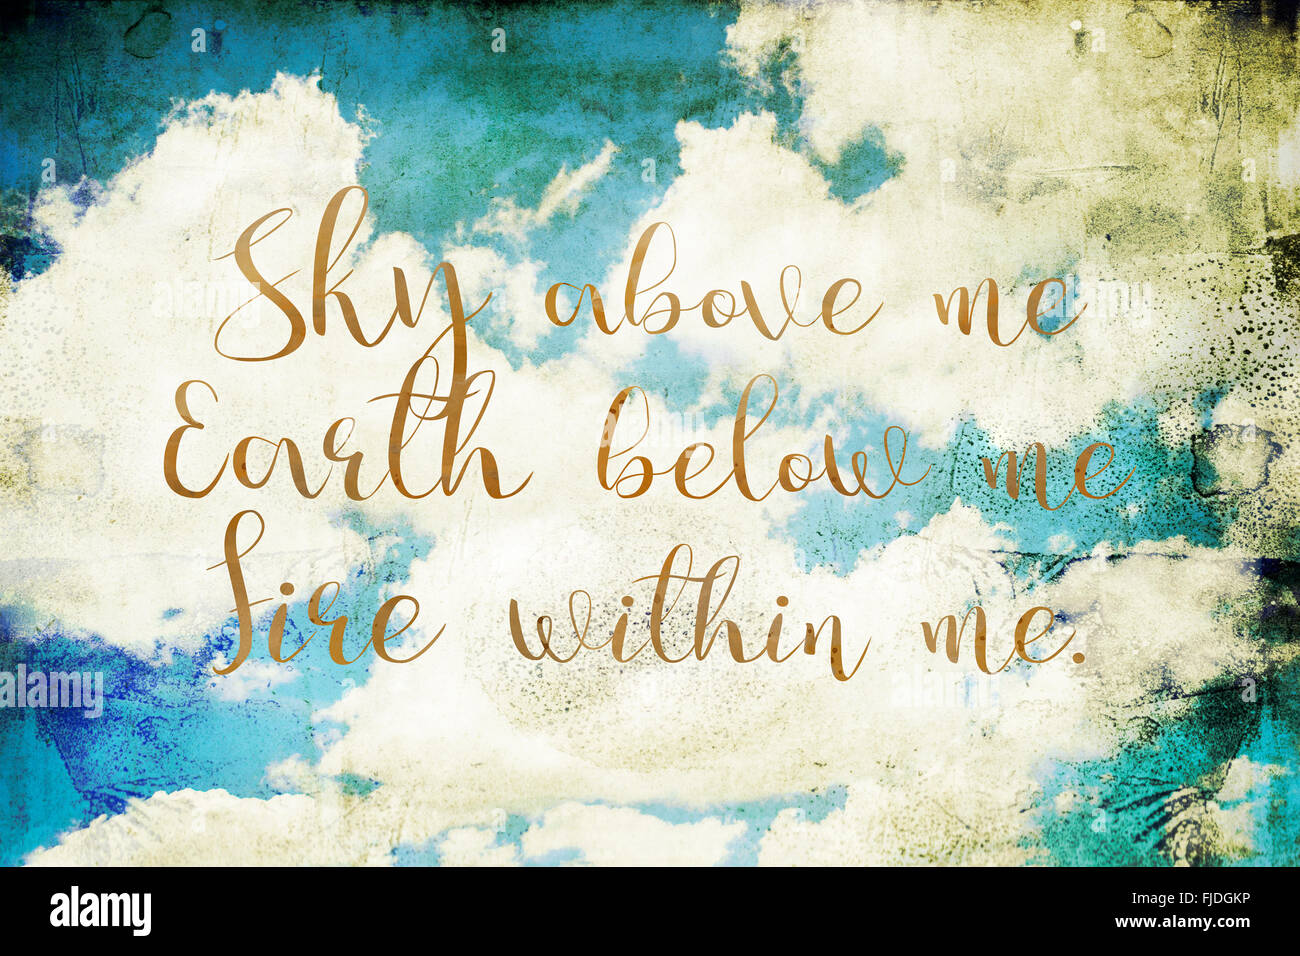 Spiritual quote on a dirty background with clouds and sky. Stock Photo